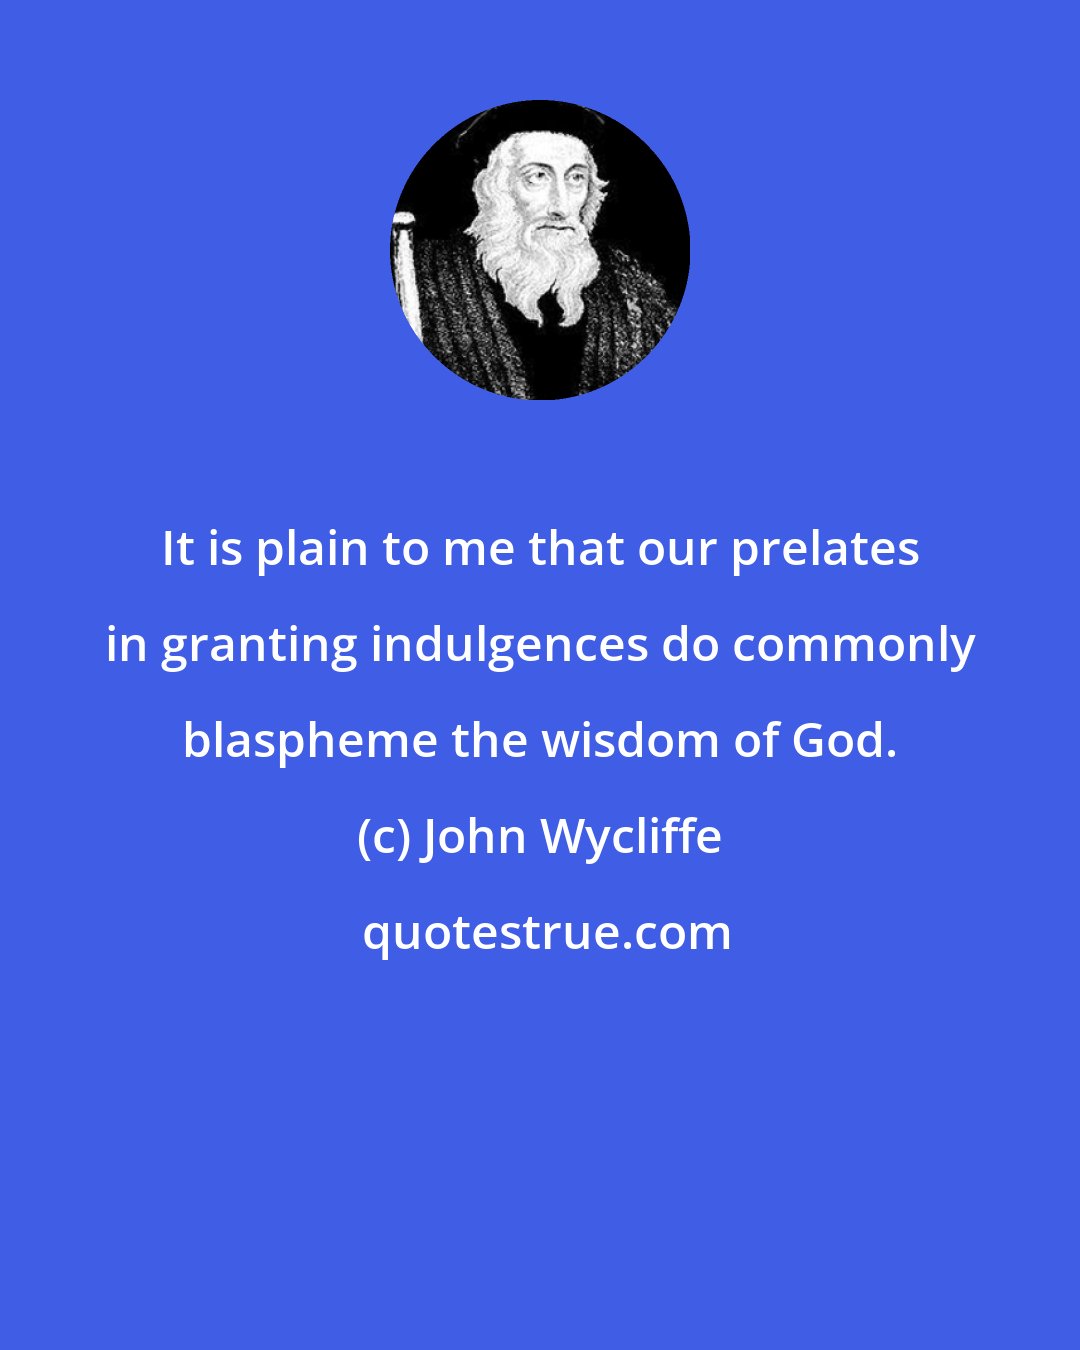 John Wycliffe: It is plain to me that our prelates in granting indulgences do commonly blaspheme the wisdom of God.